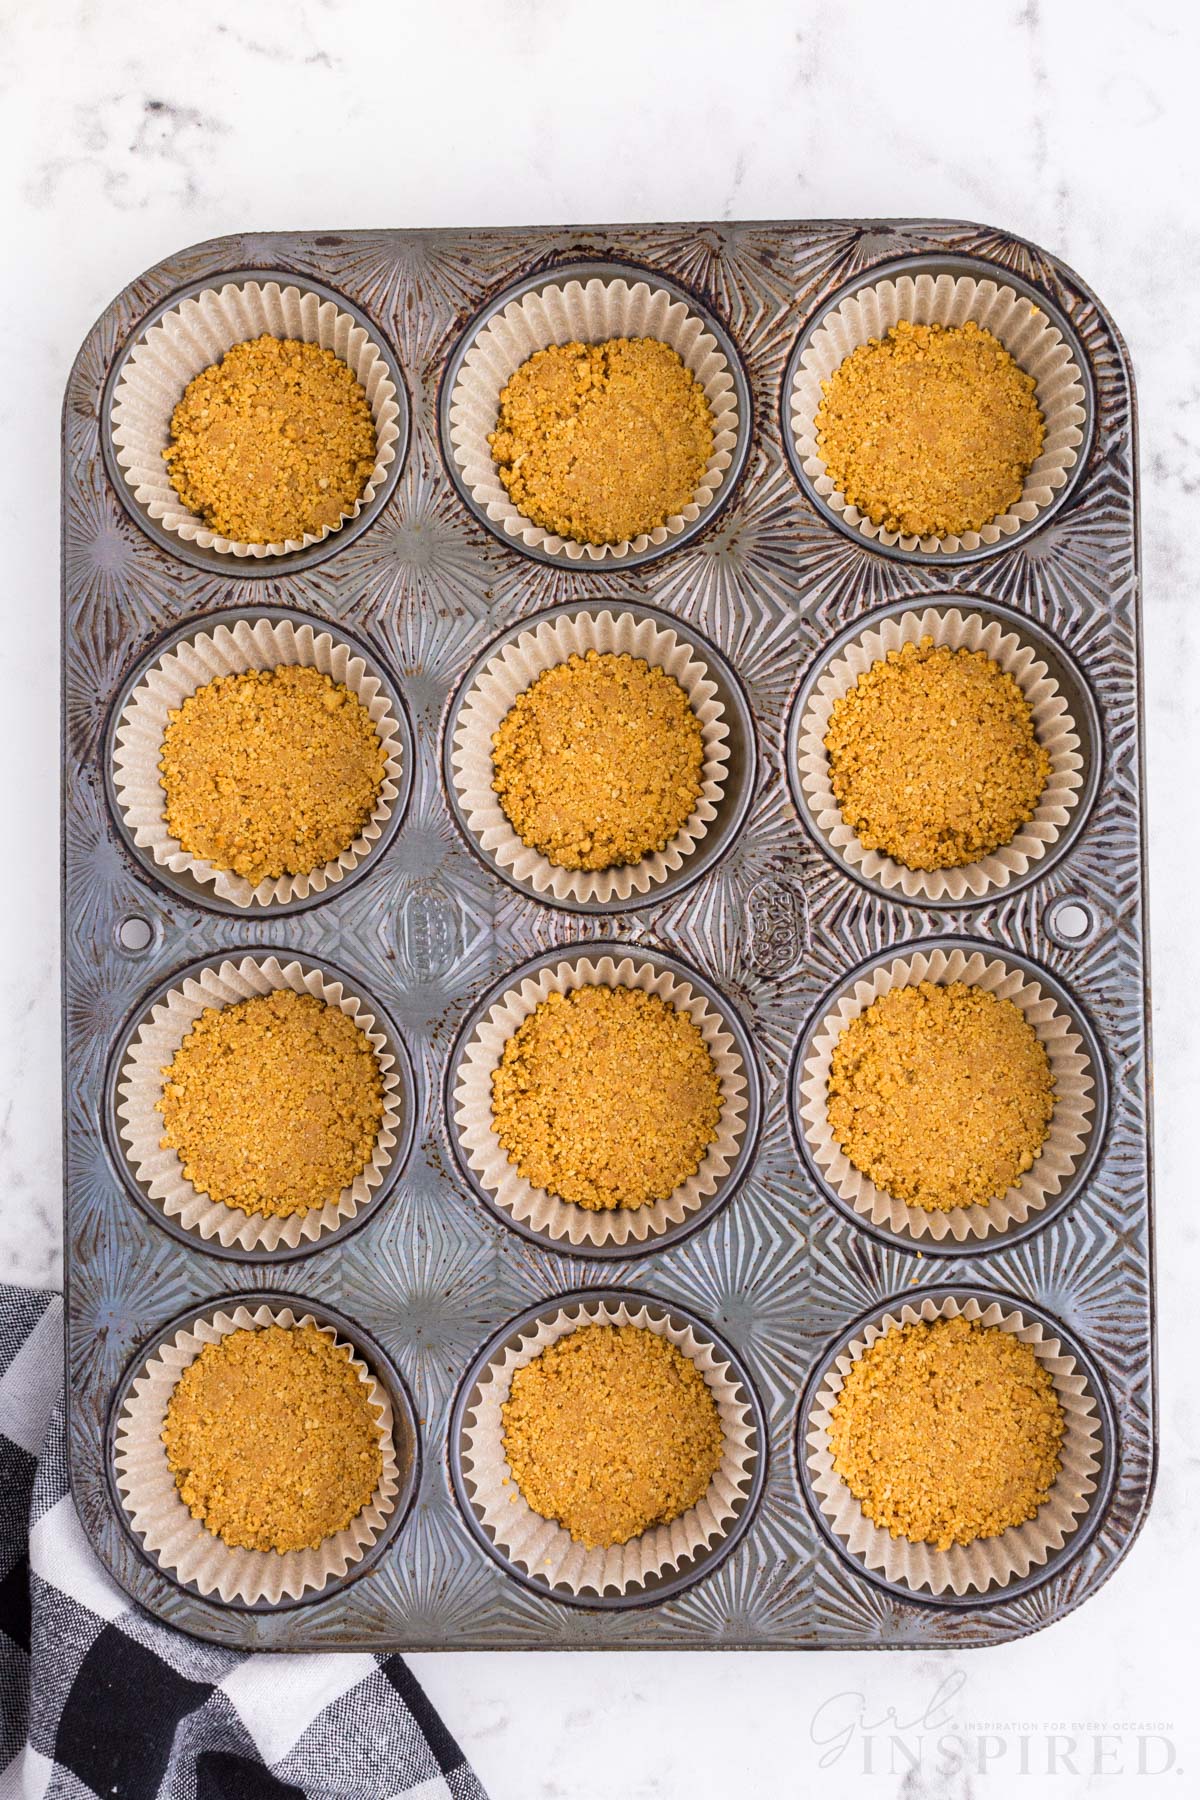 Metal cupcake tray with foil wrapper liners and Graham cracker crust pressed into each cup, checkered linen, on a marble countertop.